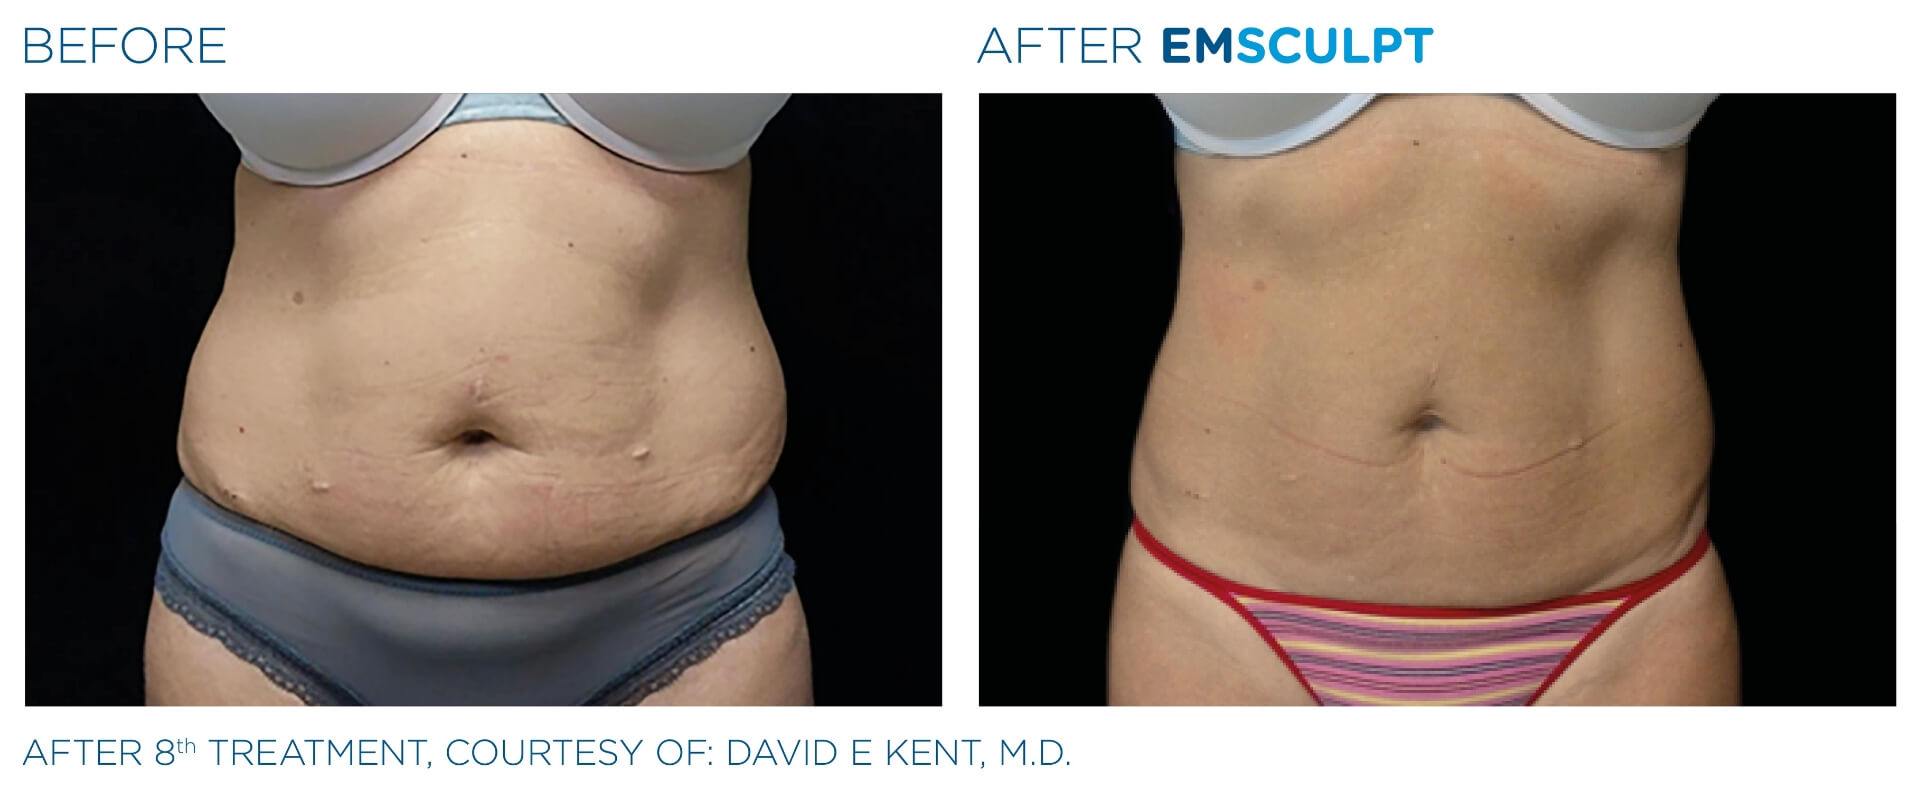 Before and after EMSCULPT treatments